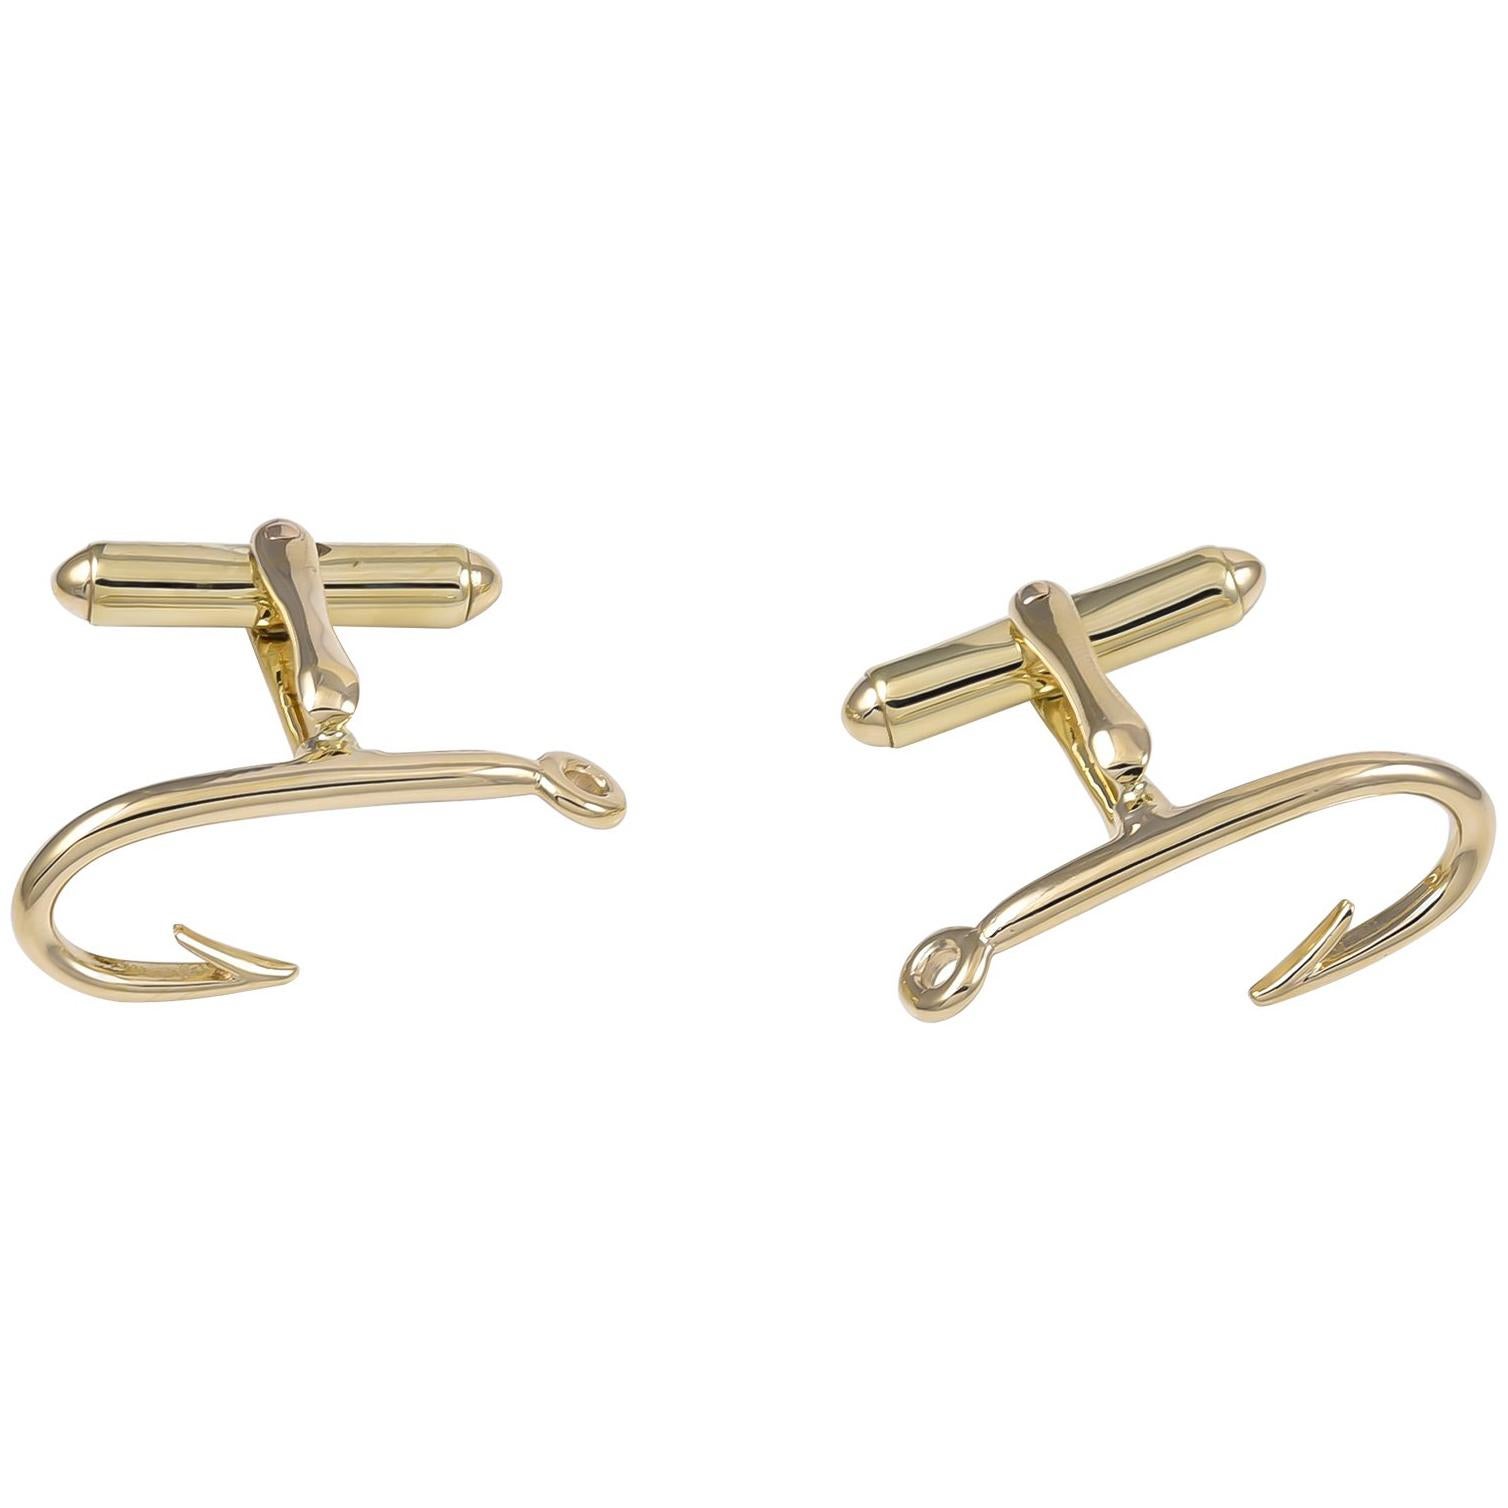 Tiffany & Co. Gold Fish Hook Cufflinks For Sale